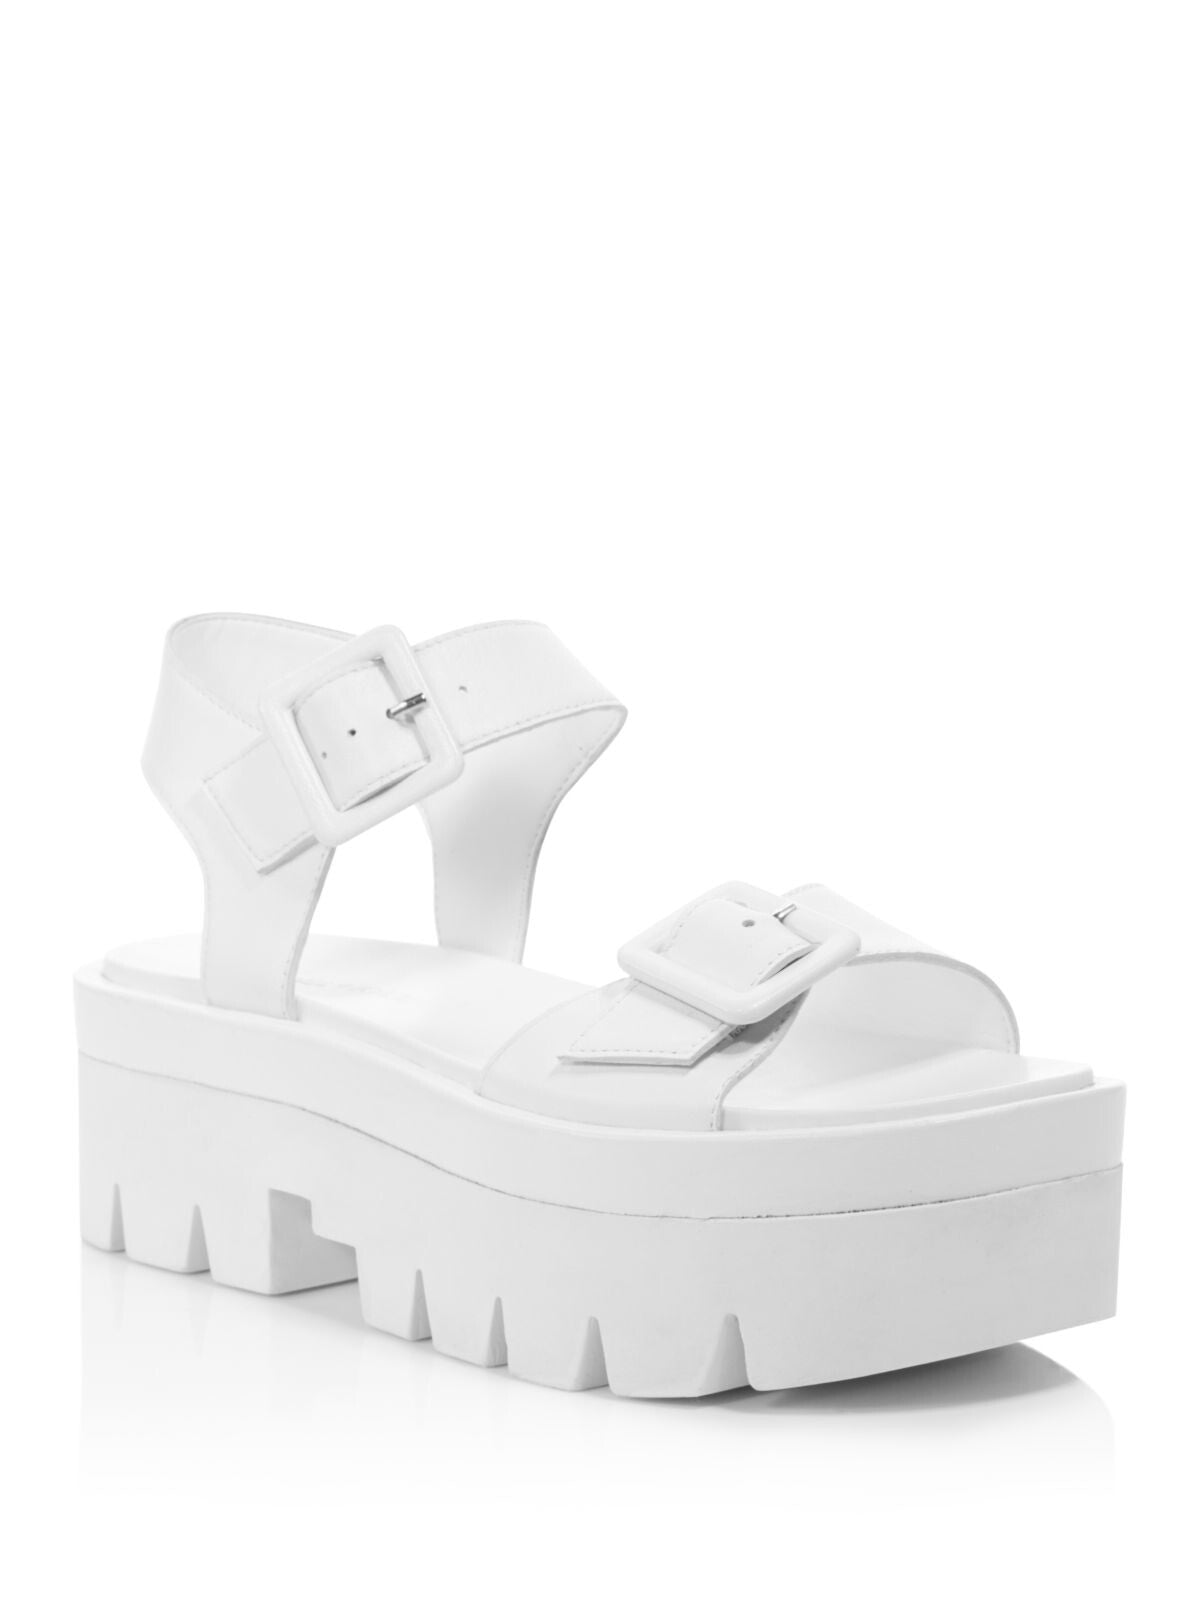 KENDALL + KYLIE Womens White Treaded Sole Ankle Strap Buckle Accent Wave Round Toe Wedge Buckle Leather Sandals Shoes 11 M